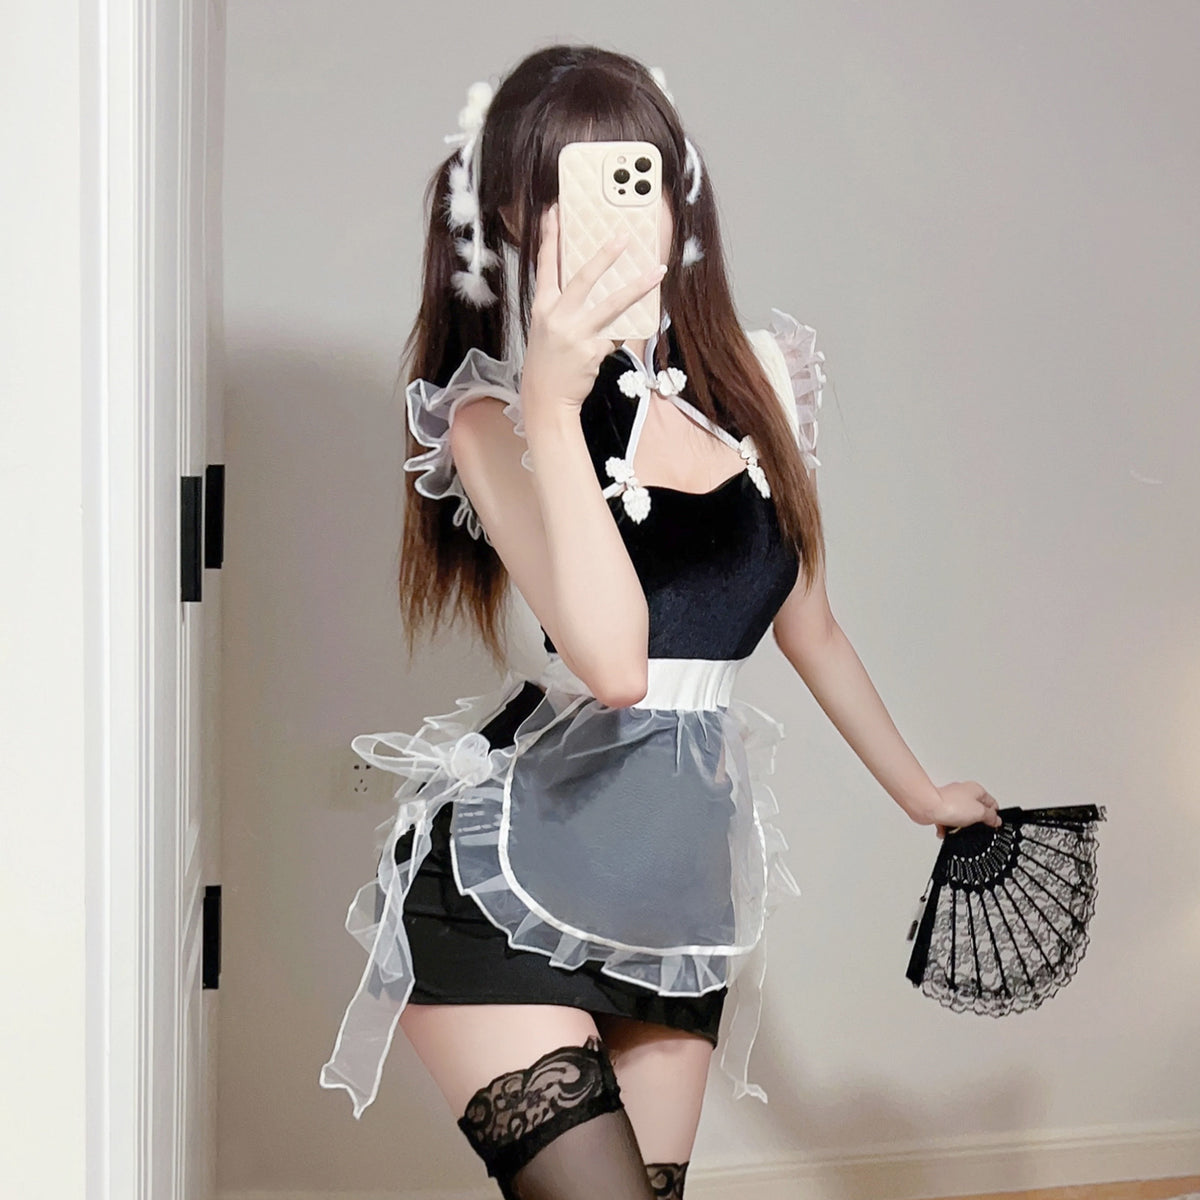 Yomorio Chinese Maid Lingerie Set Sexy Hollow Out Anime Bodysuit with –  YOMORIO